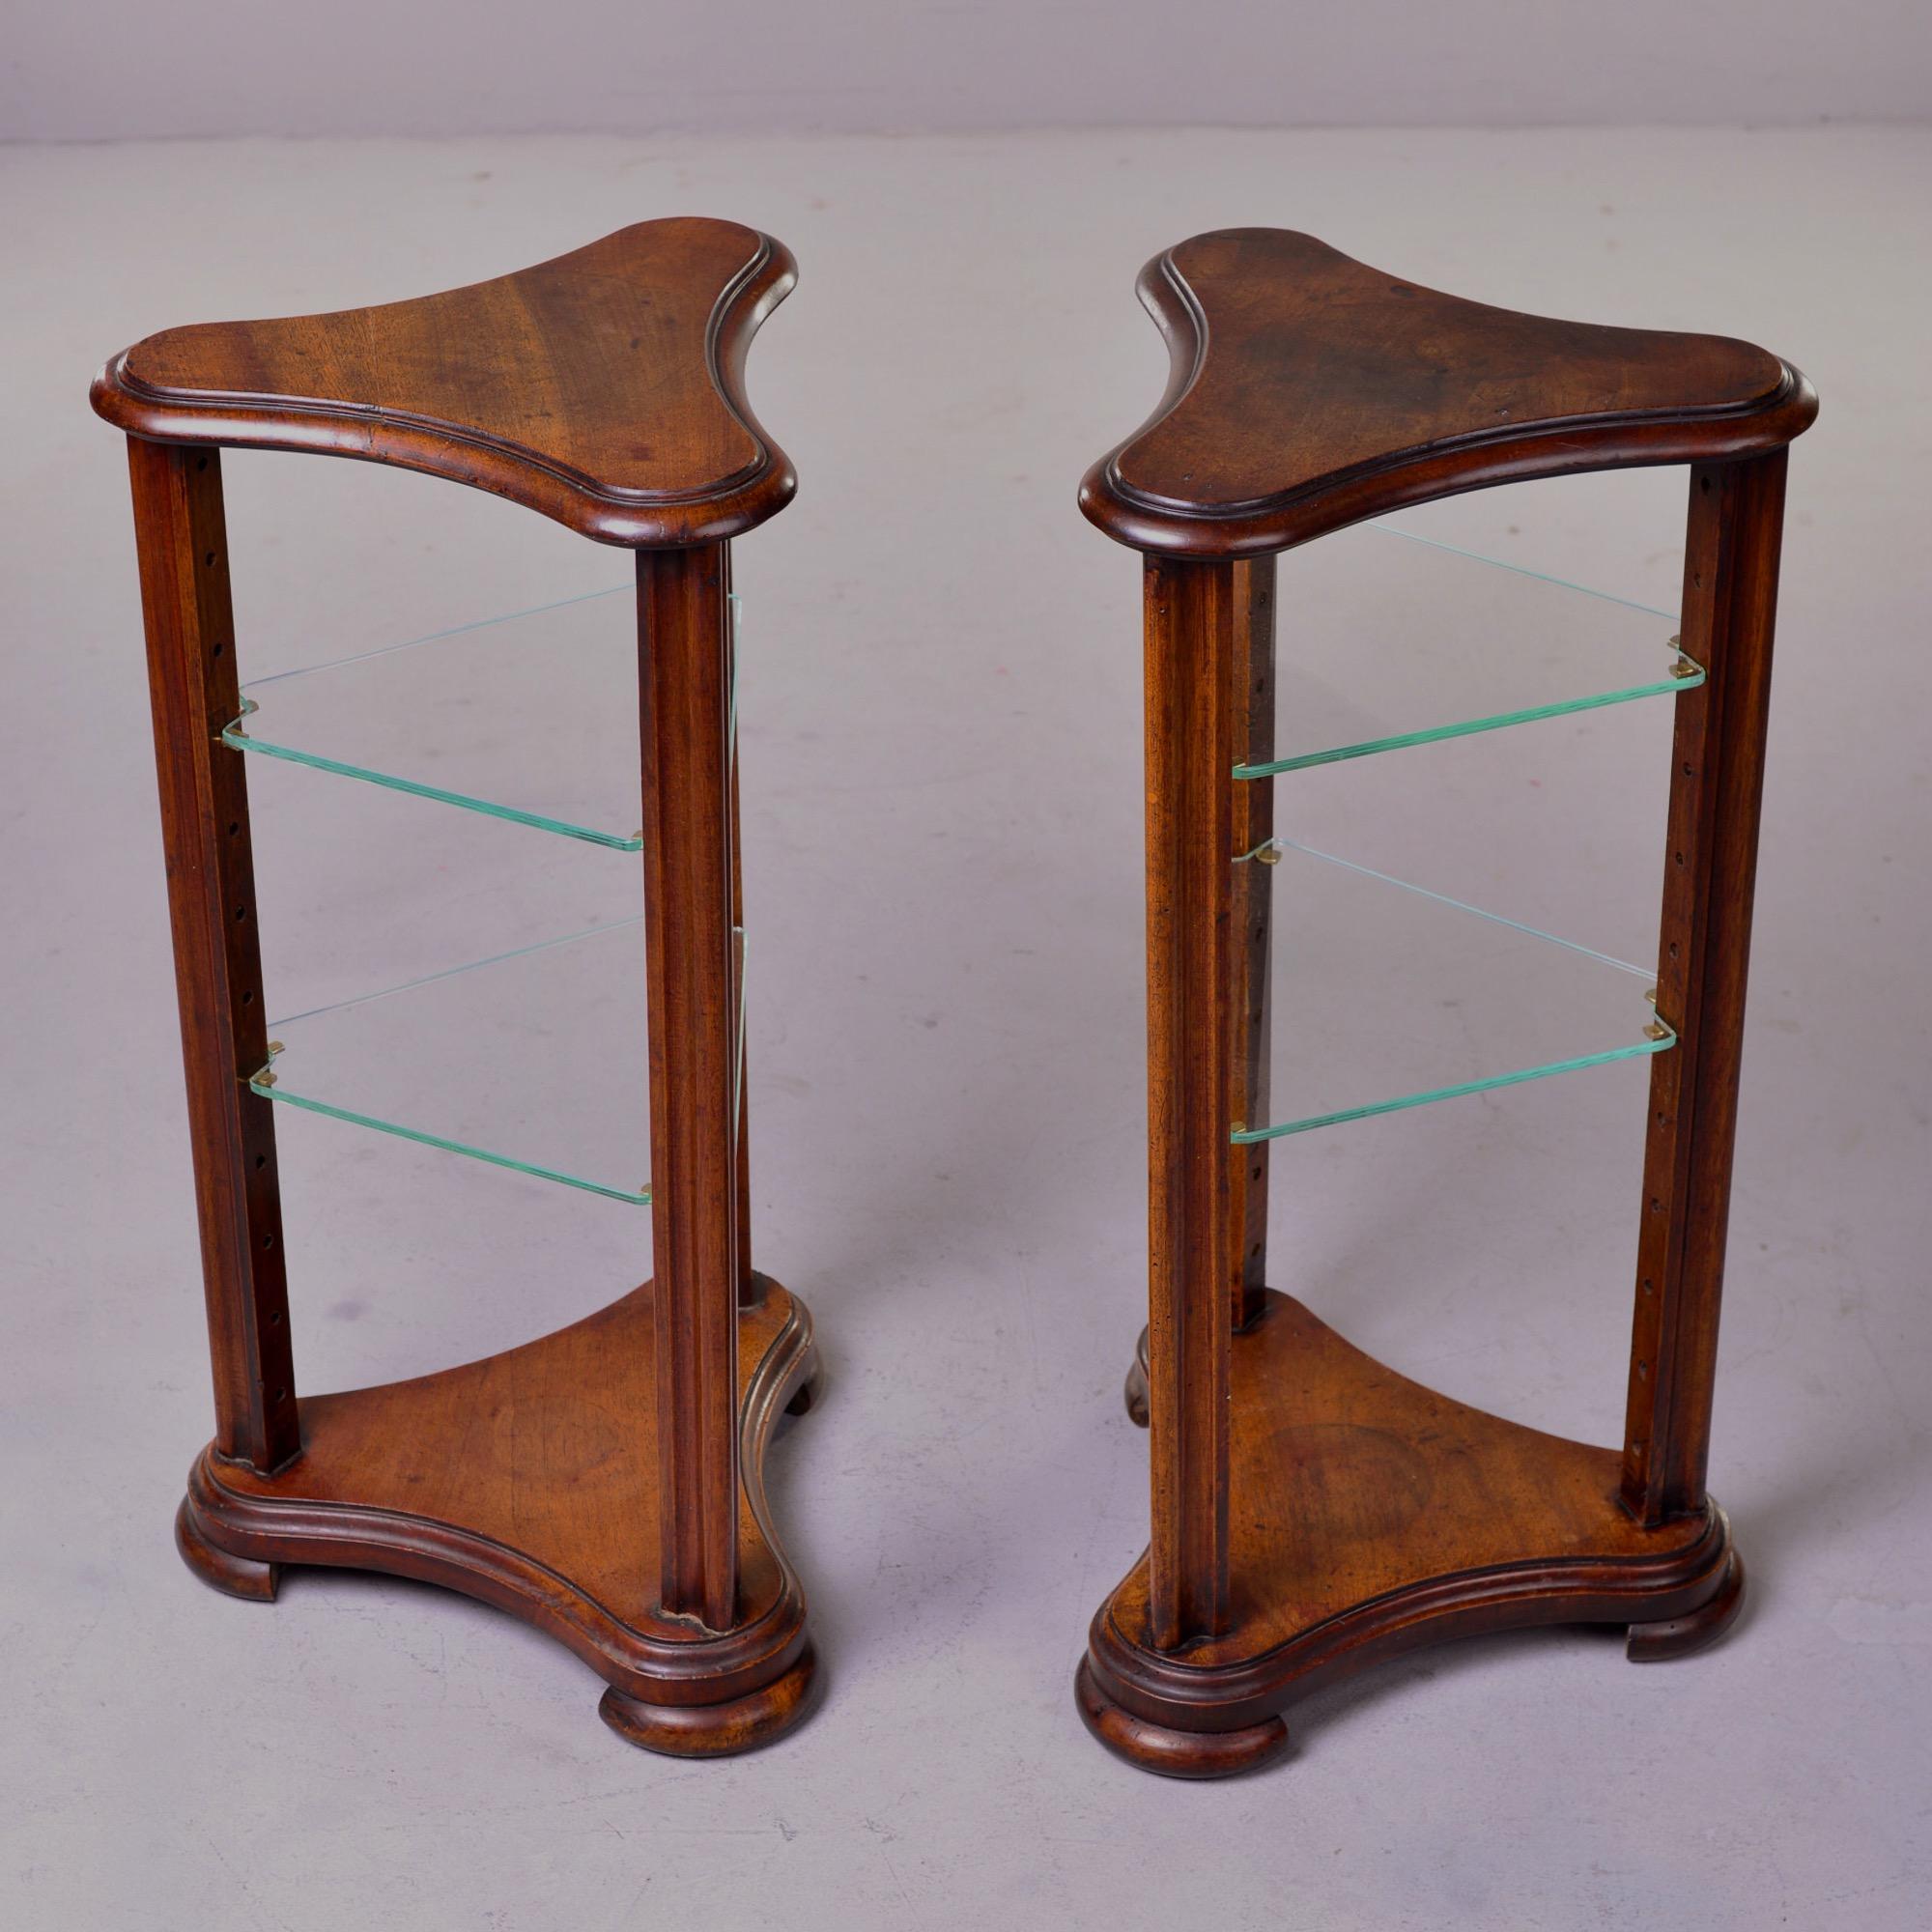 Found in England, this pair of stands or small side tables are made of walnut with a trefoil top and base and two glass shelves each. Shelf heights are adjustable. Unknown maker. Sold and priced as a pair.